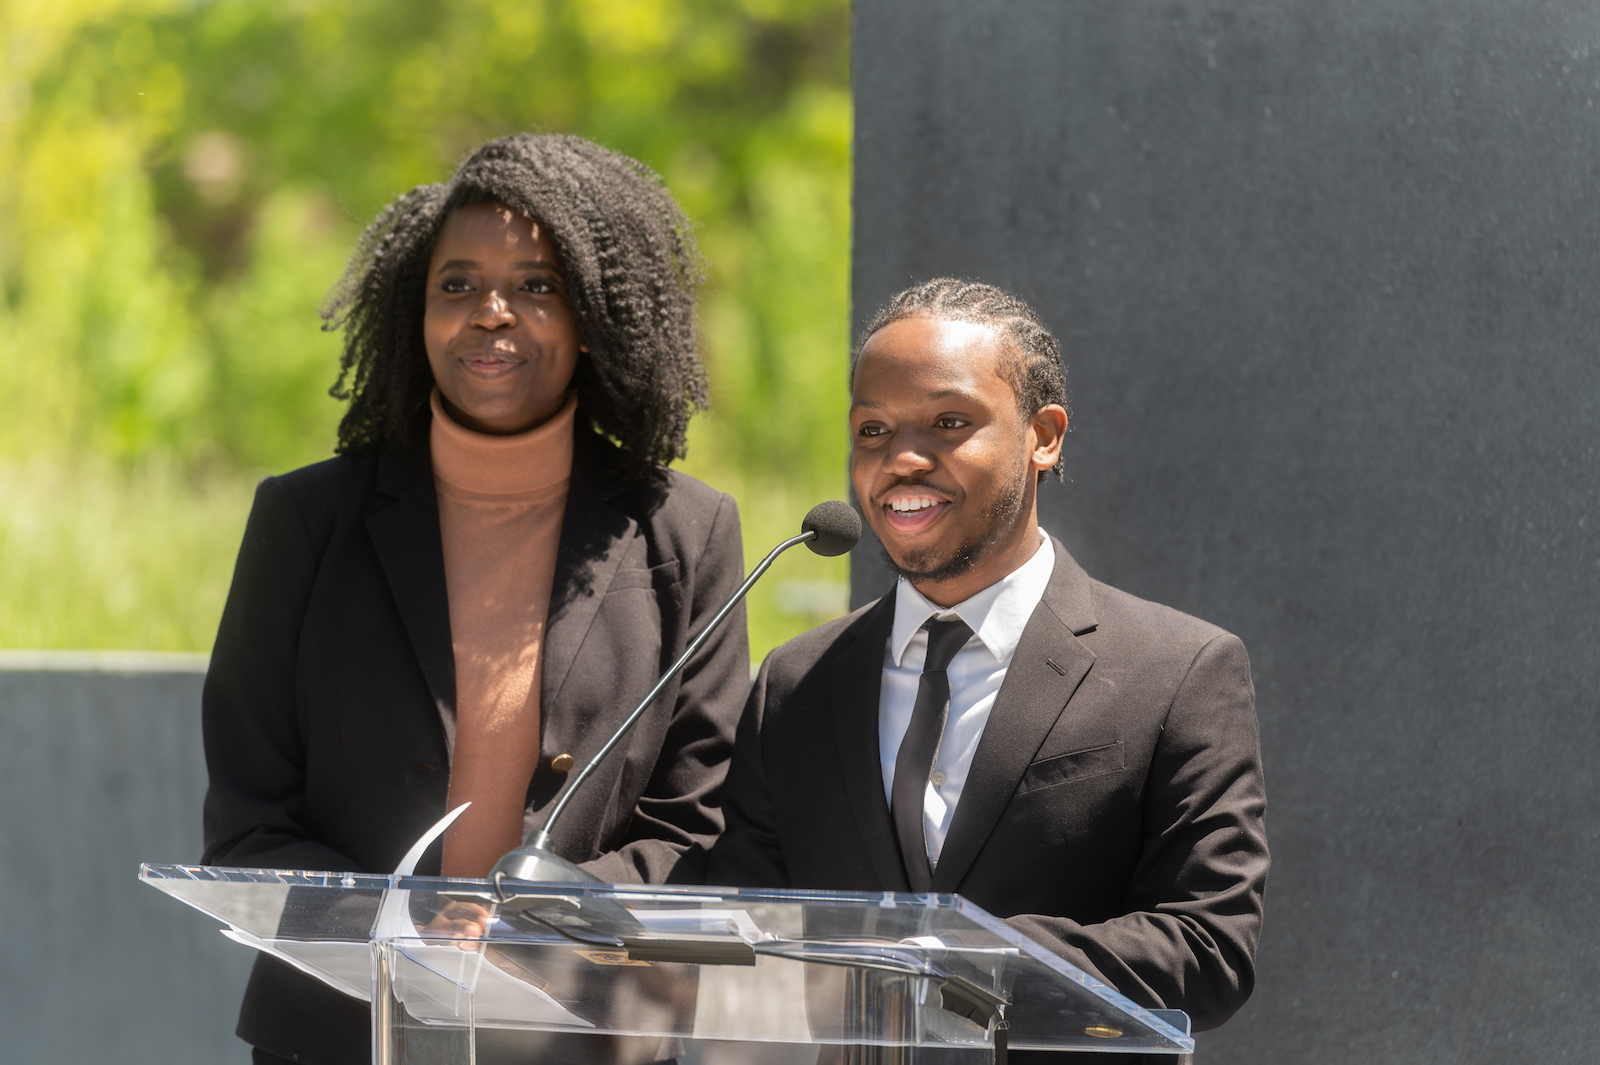 Undergraduates Shelbe Johnson (left) and Kemuel Russell spoke on behalf of the Georgia Tech African American Student Union. Photo by Allison Carter.